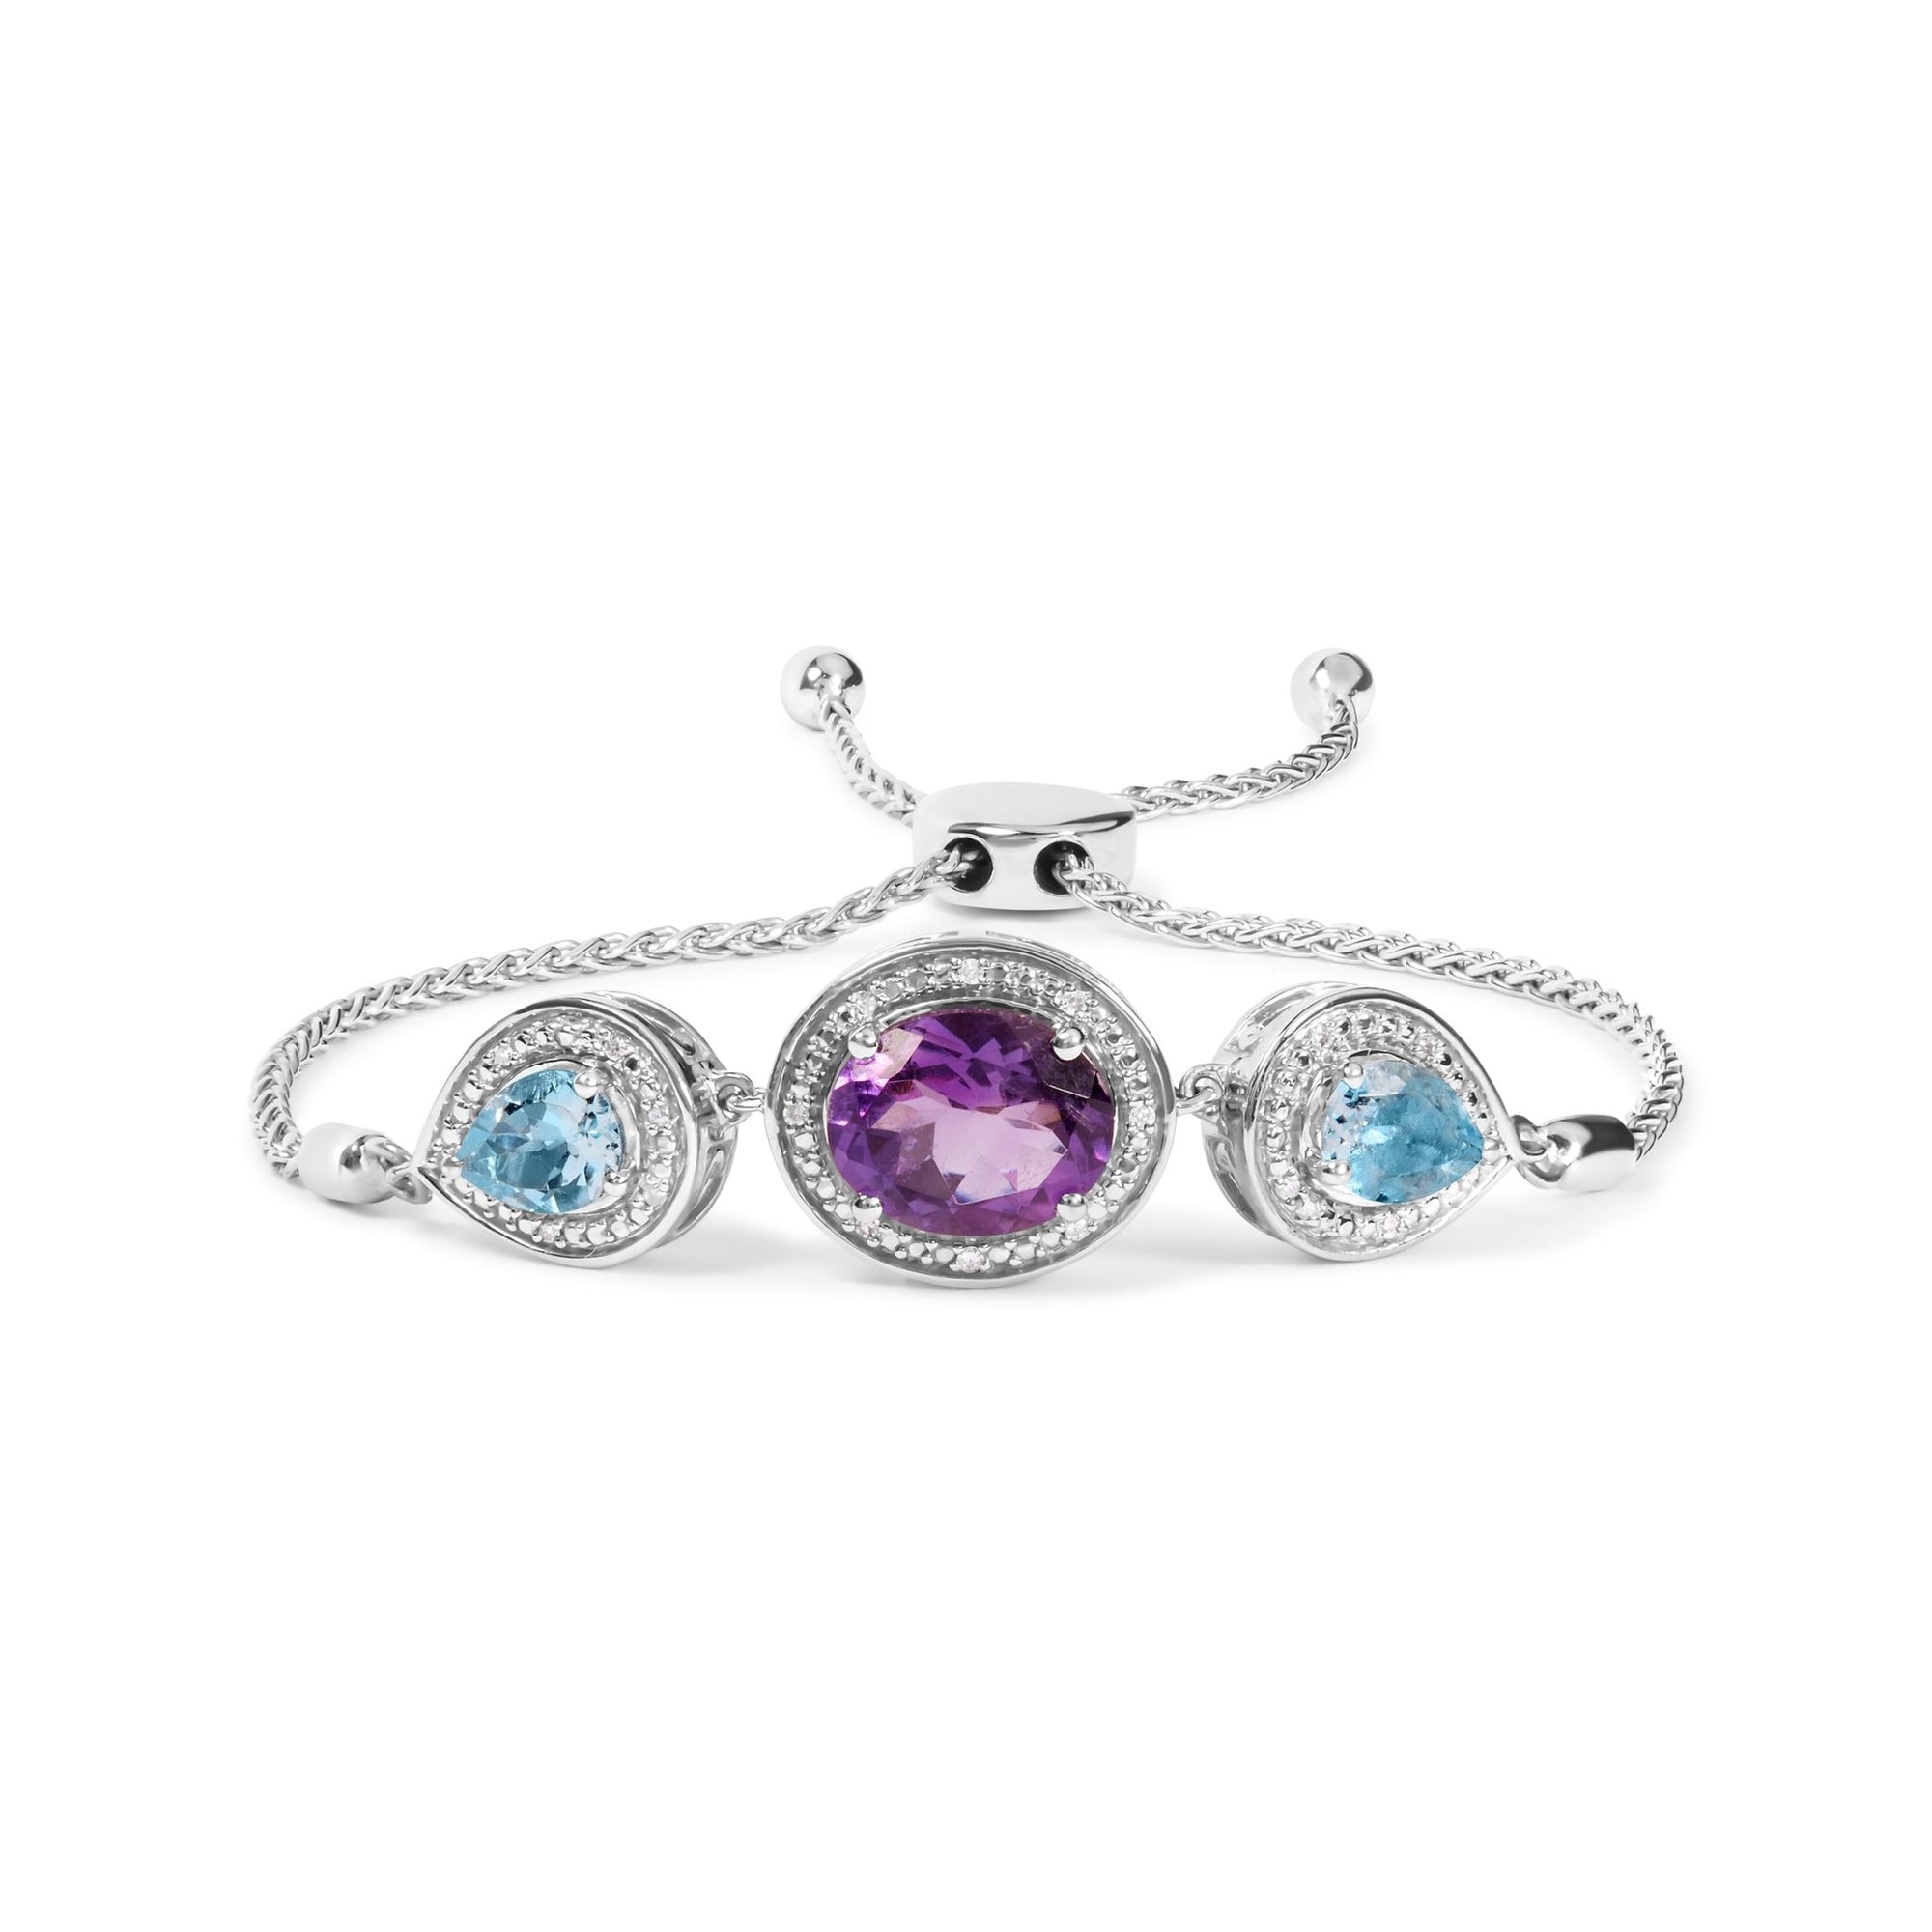 .925 Sterling Silver Oval Amethyst and Pear Blue Topaz with Diamond Accent Lariat 4”-10” Adjustable Bolo Bracelet (H-I Color, SI1-SI2 Clarity) - LinkagejewelrydesignLinkagejewelrydesign